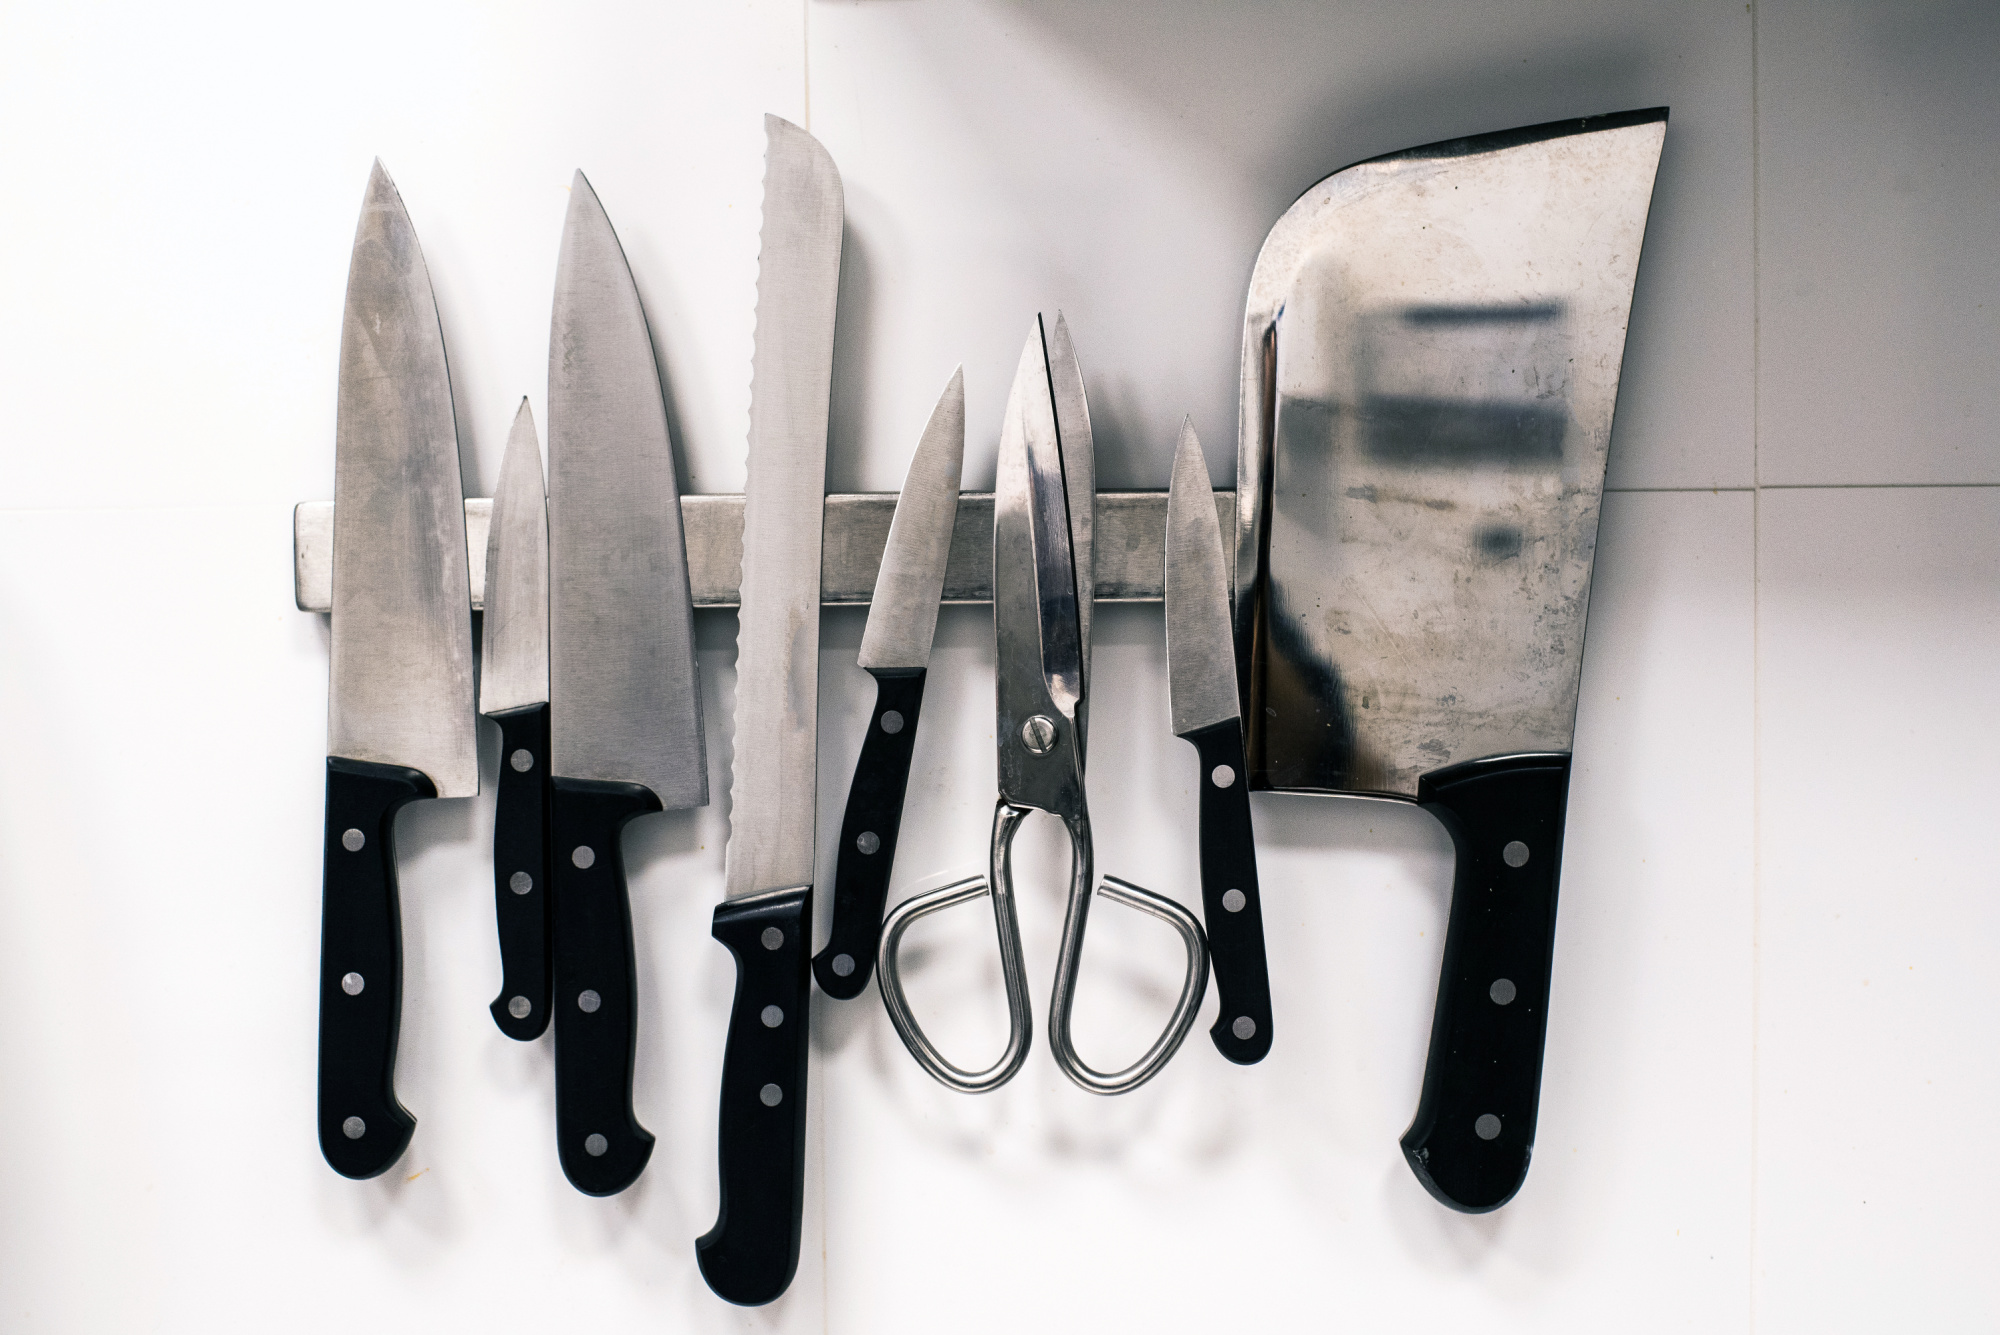 A group of knives and a pair of scissors hanging on a wall.